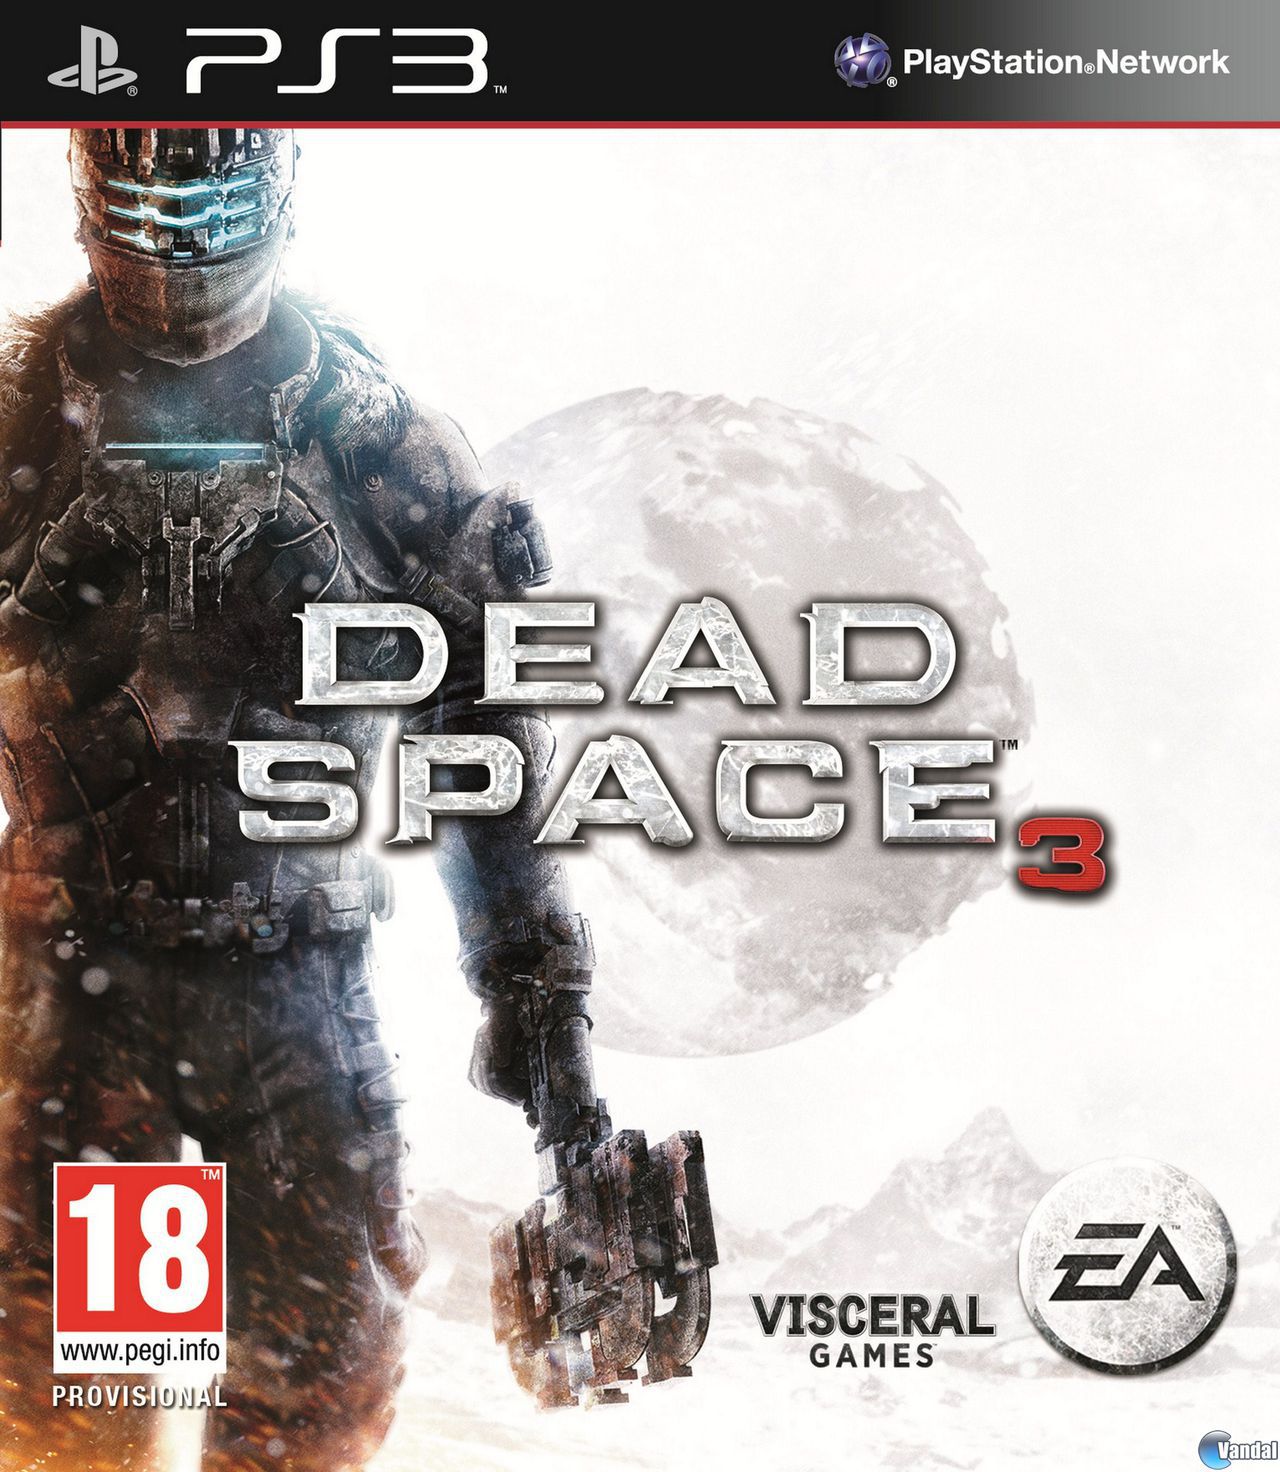 how to download dead space 3 xbox 360 awakened patch